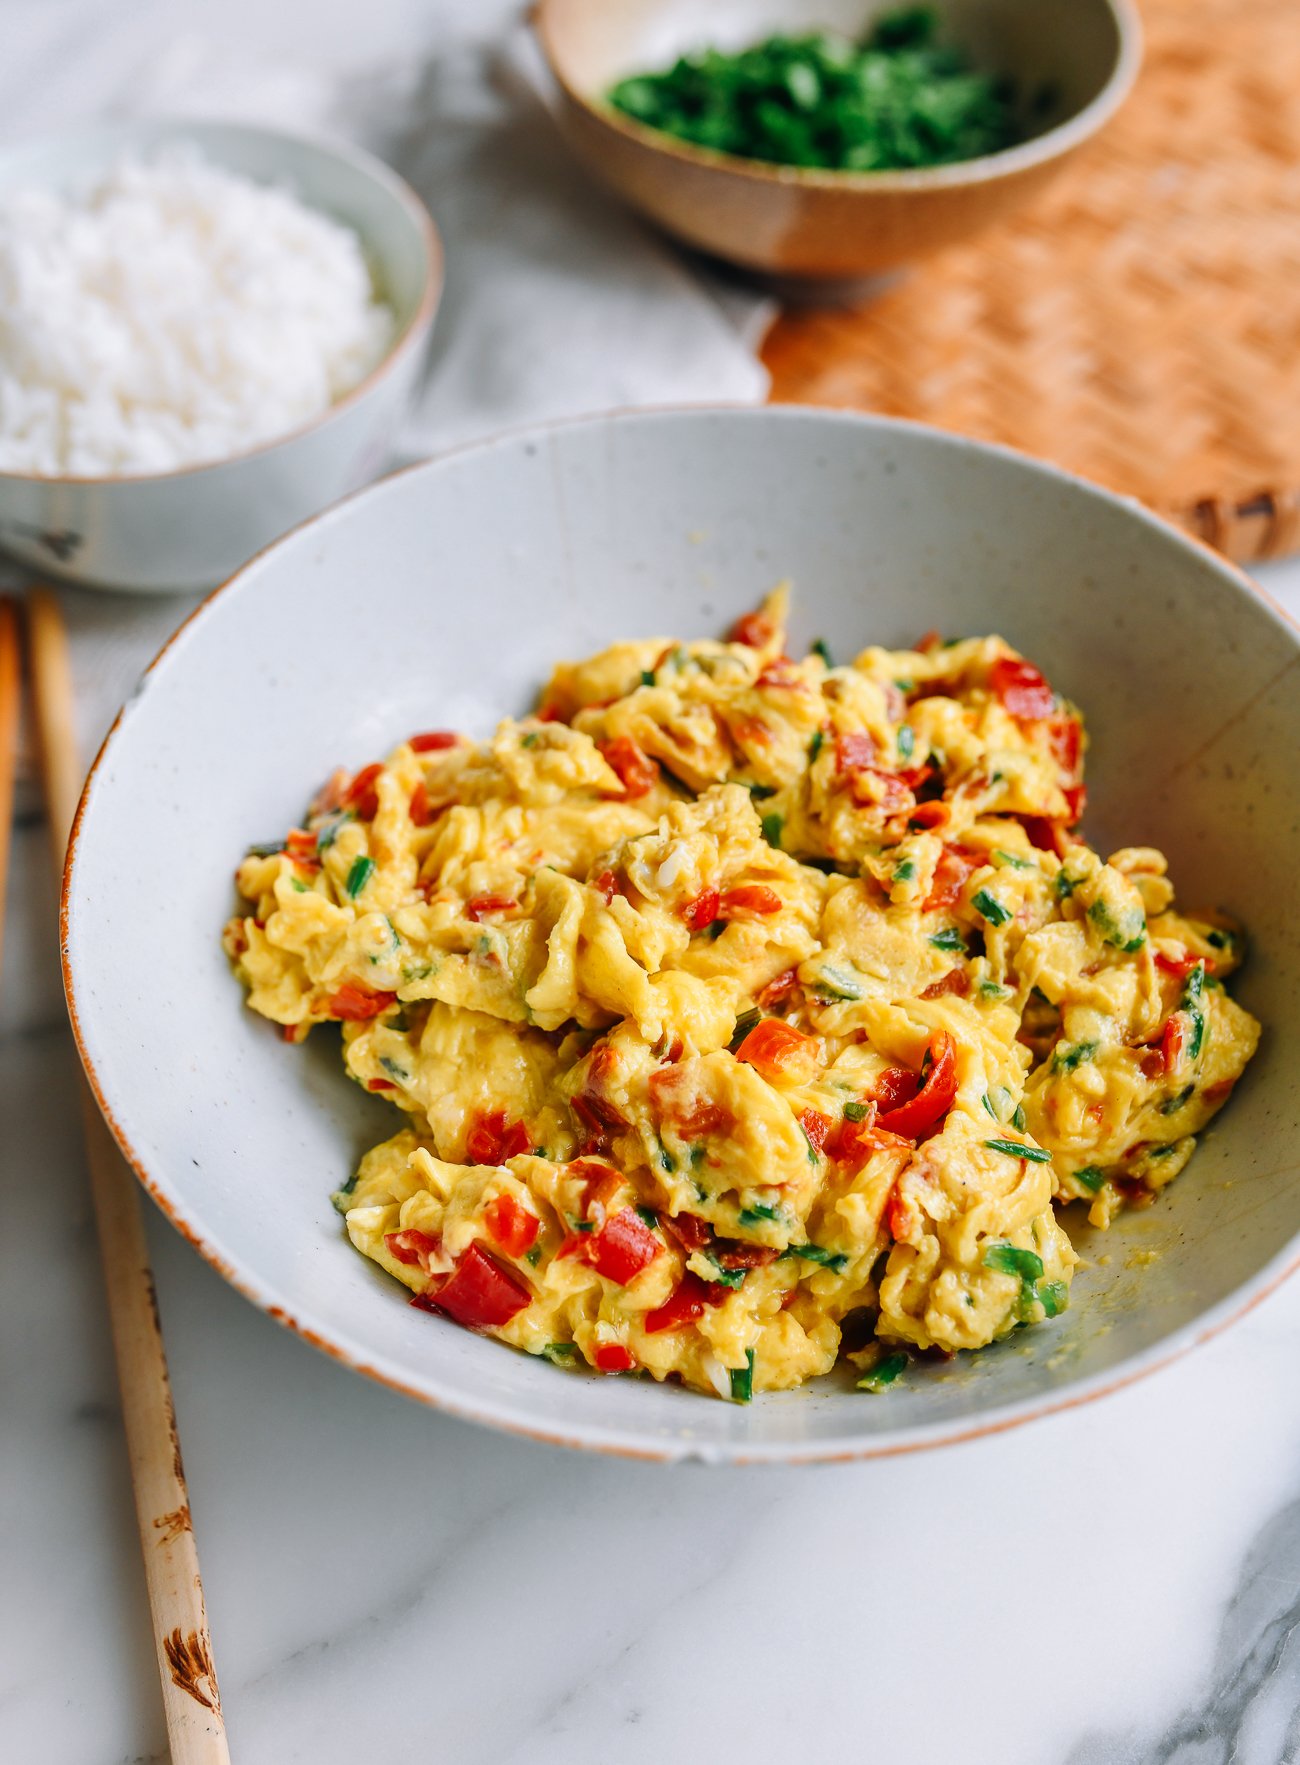 Chinese Scrambled Eggs with Salted Chilies - The Woks of Life